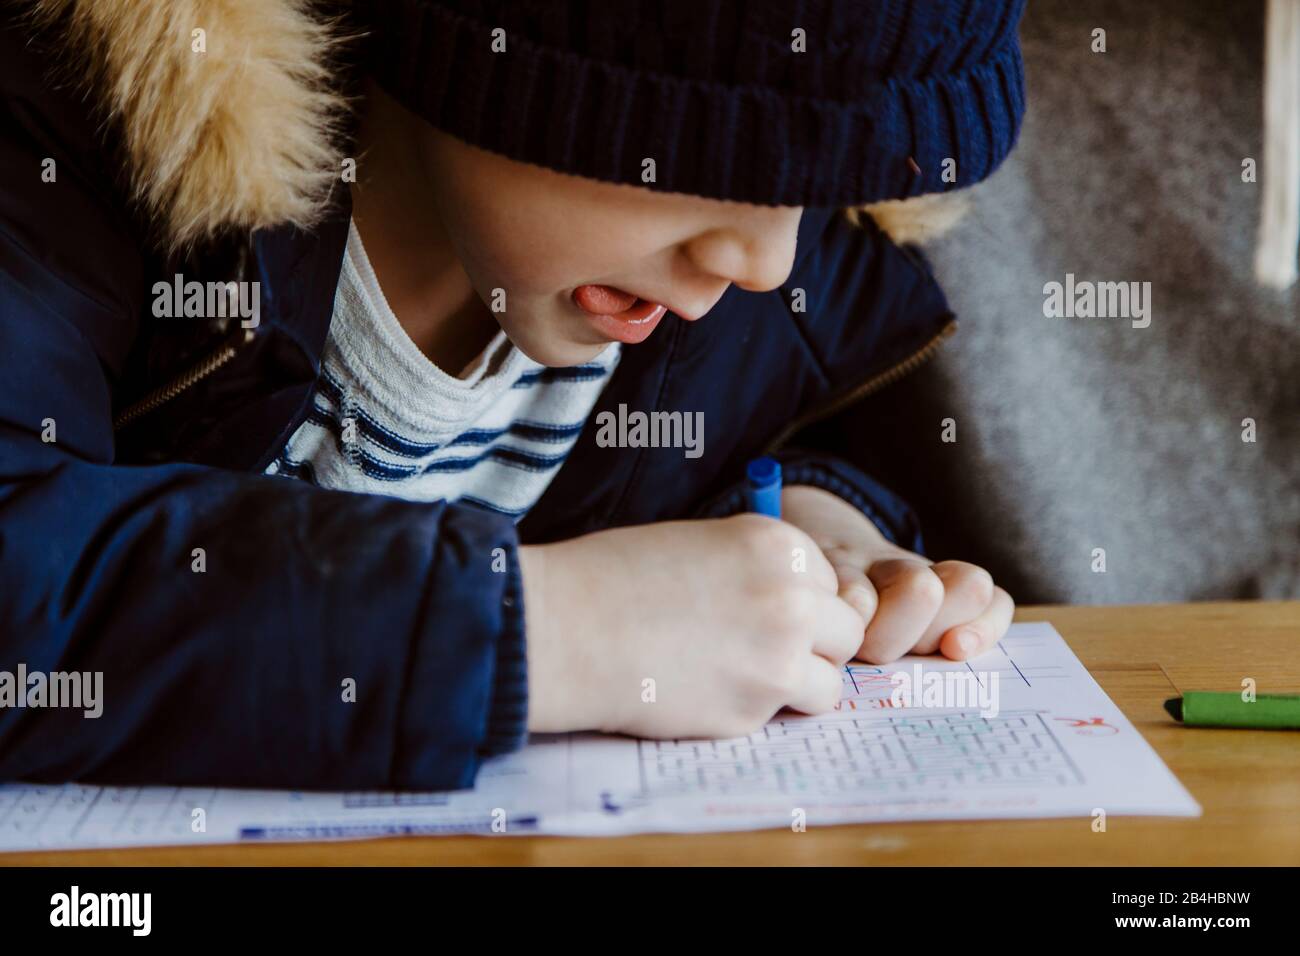 Boy coloring at restaurant table while waiting sticking tongue out Stock Photo